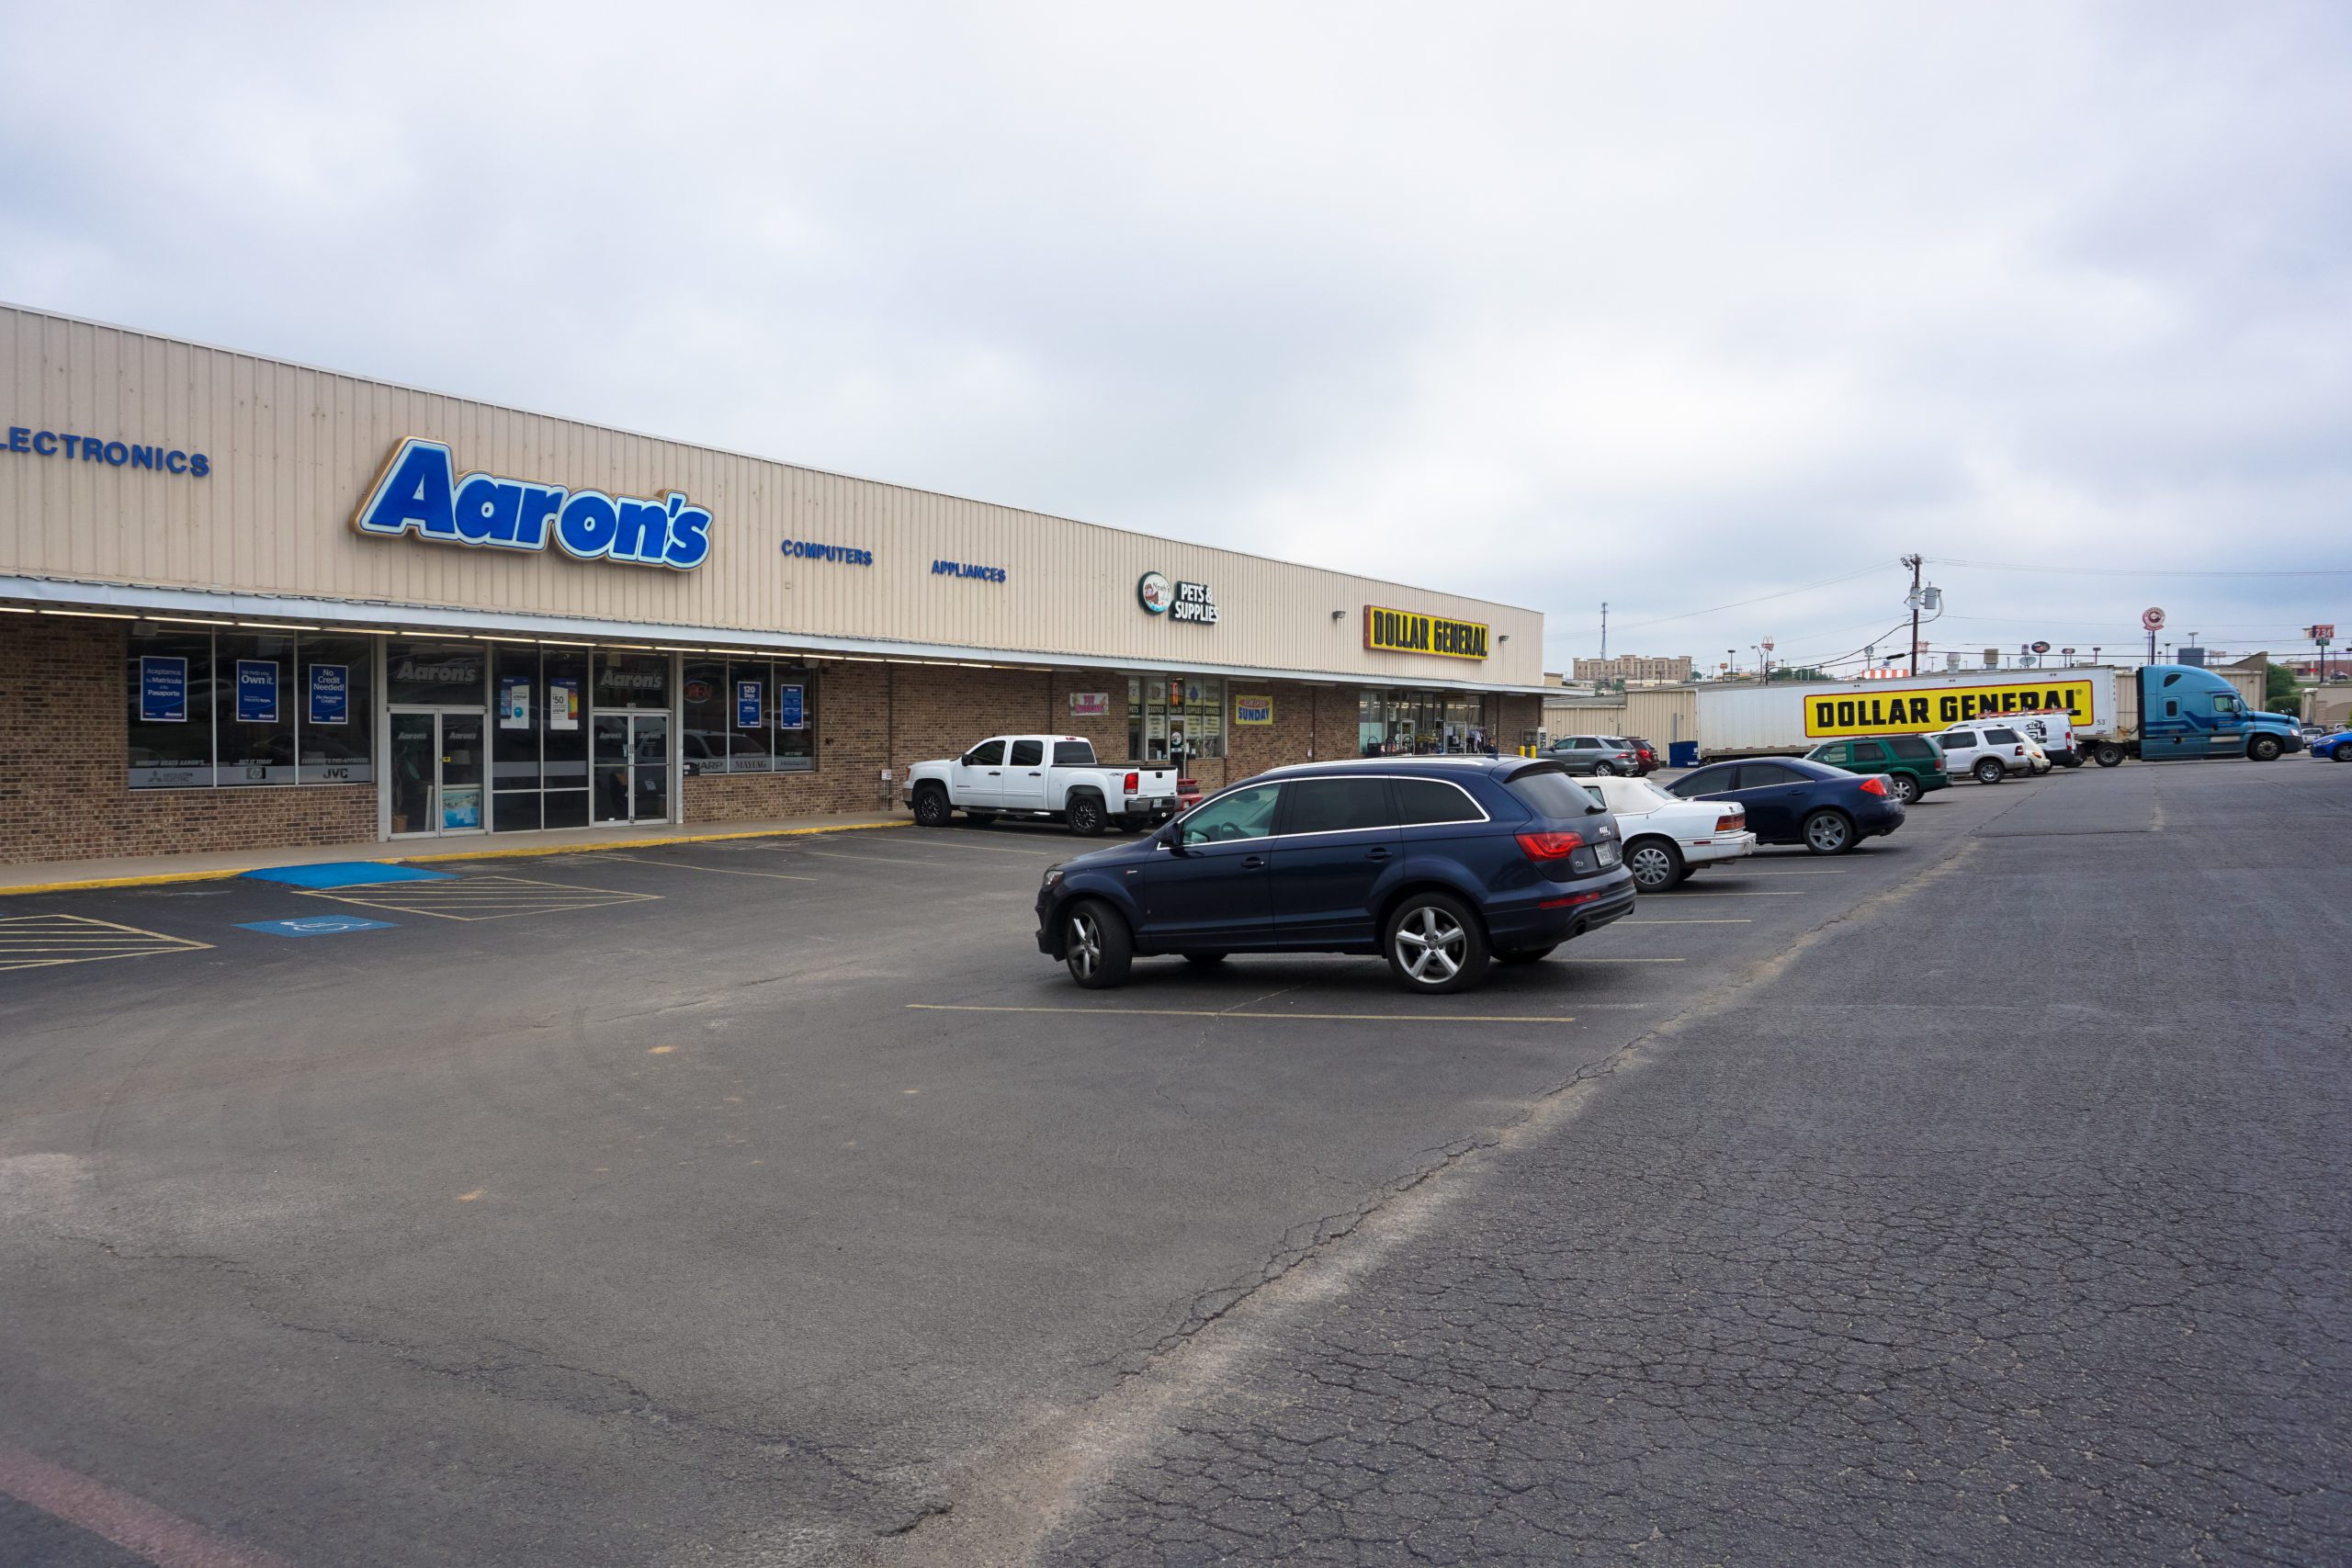 Exterior Photograph of Aaron's and Dollar General in Decatur, Texas